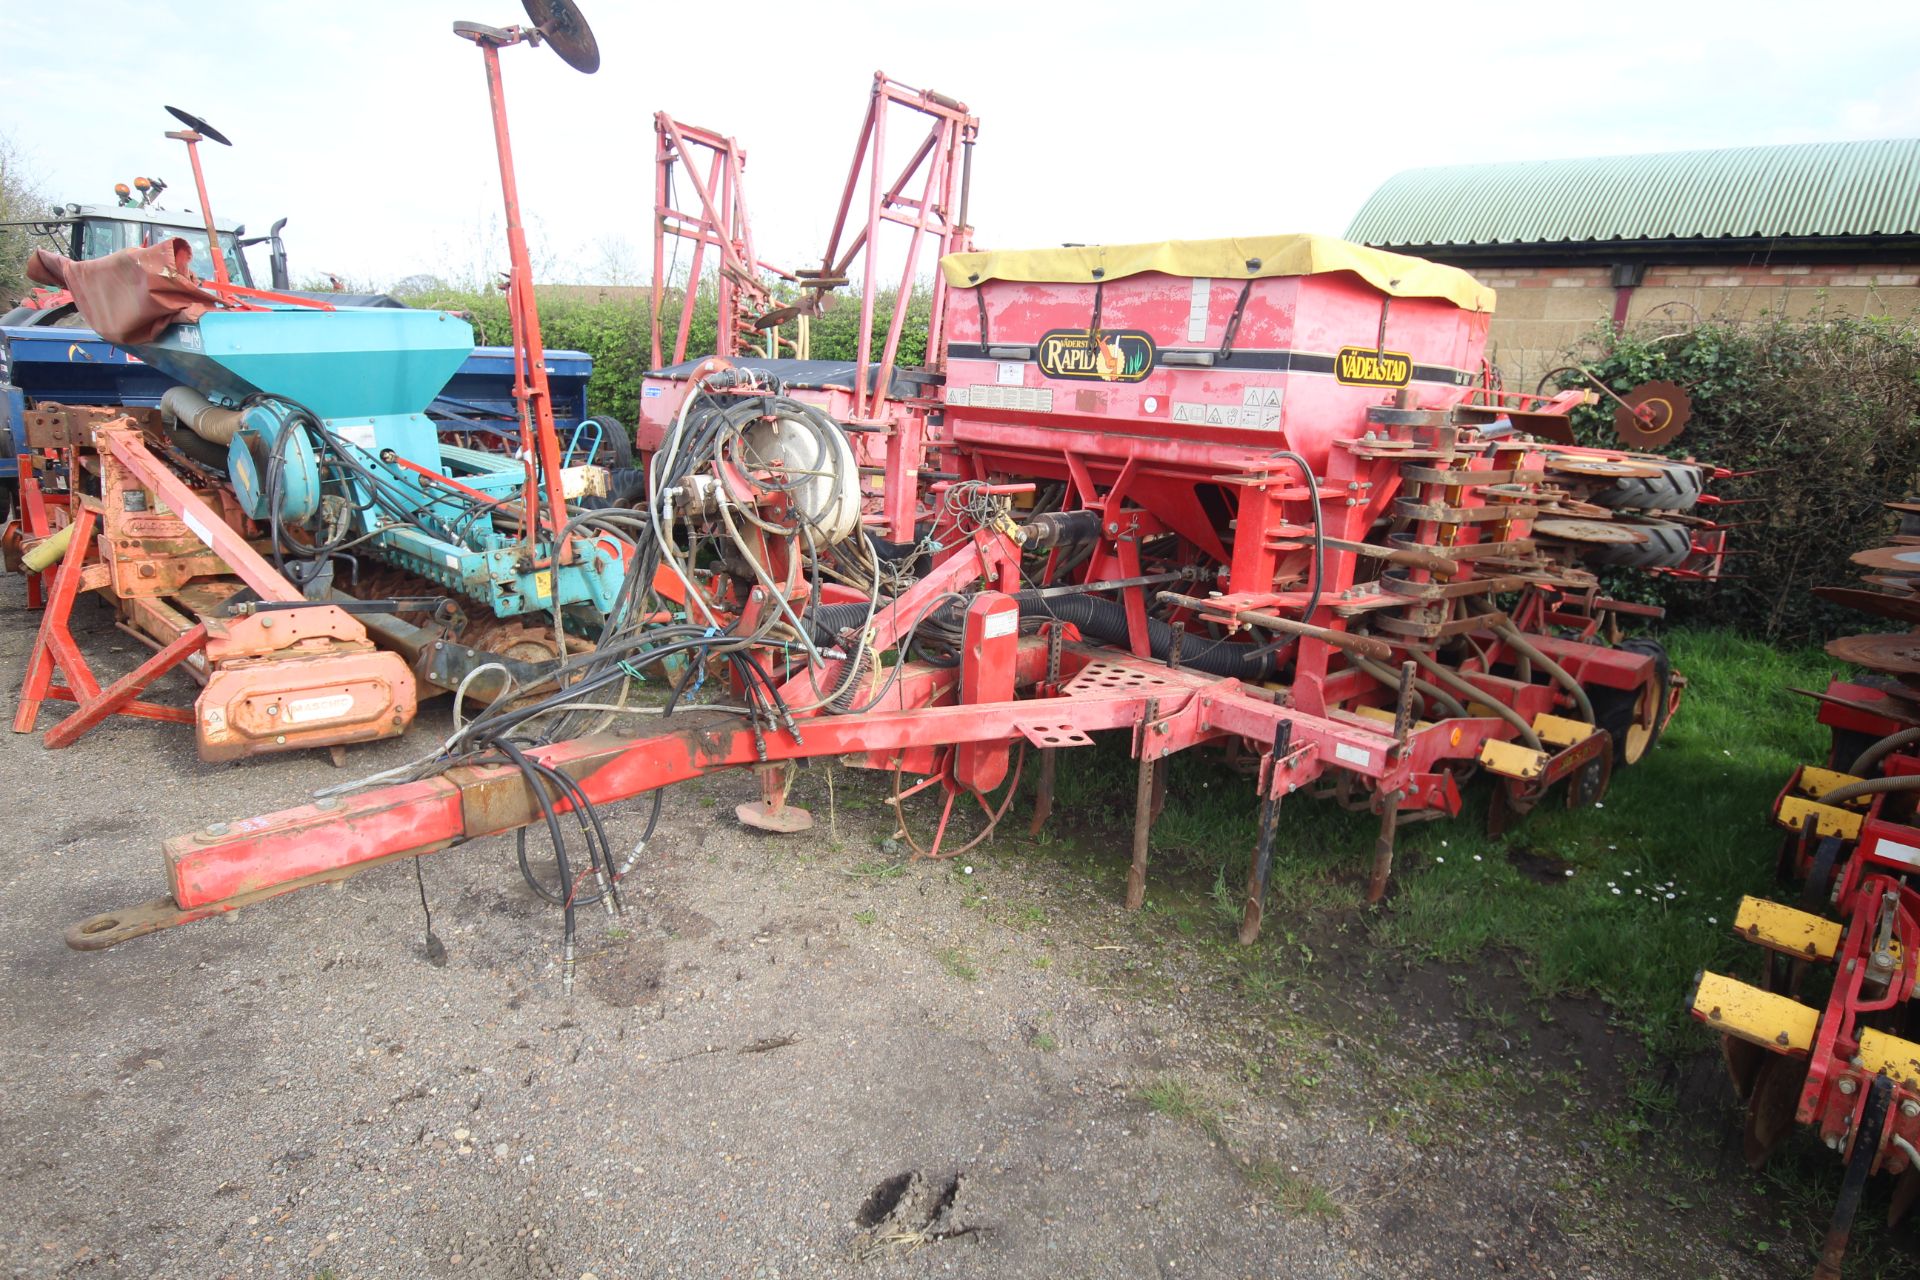 Vaderstad Rapid 400F 4m drill. Comprising rigid tines, two rows of disc coulters, tyre packer,